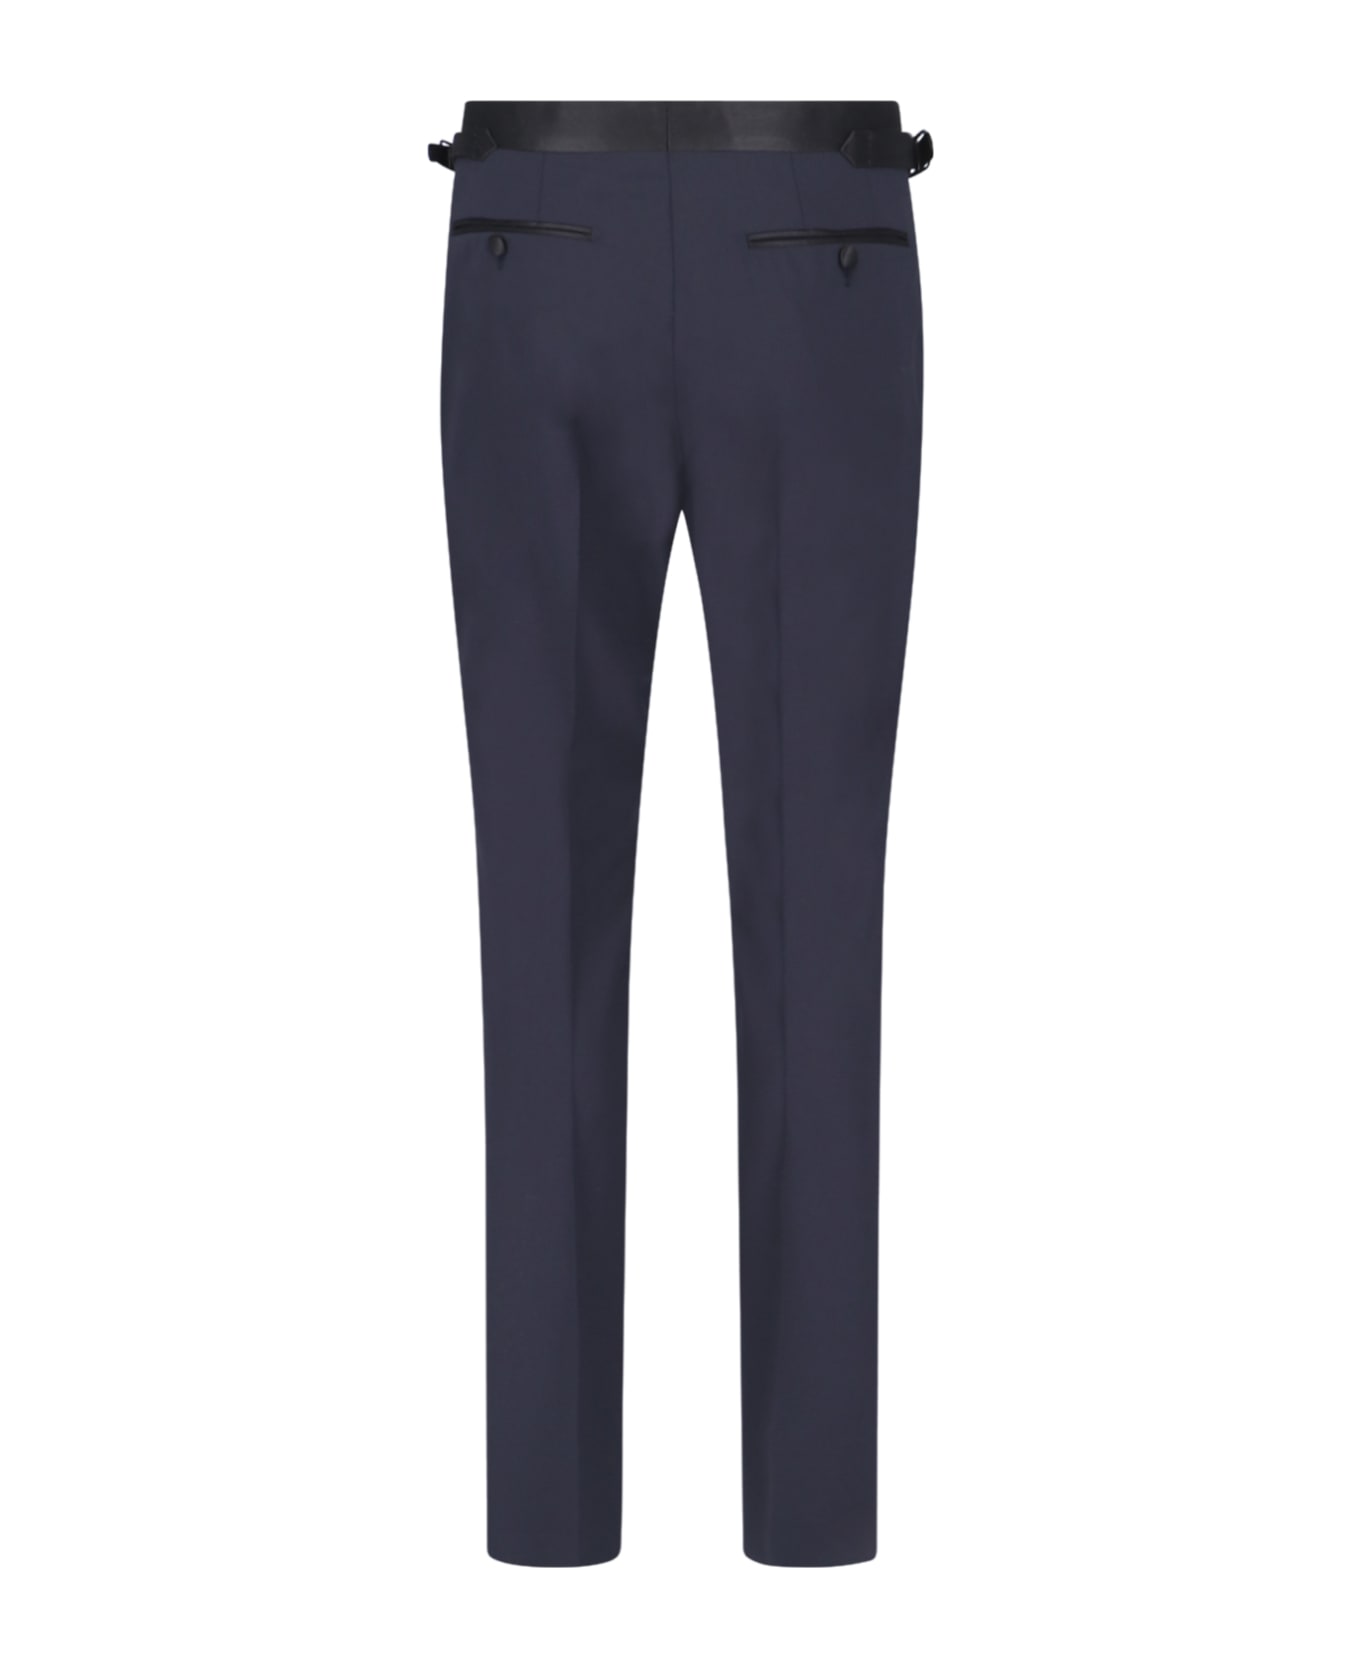 Tom Ford Single-breasted Suit - Blue